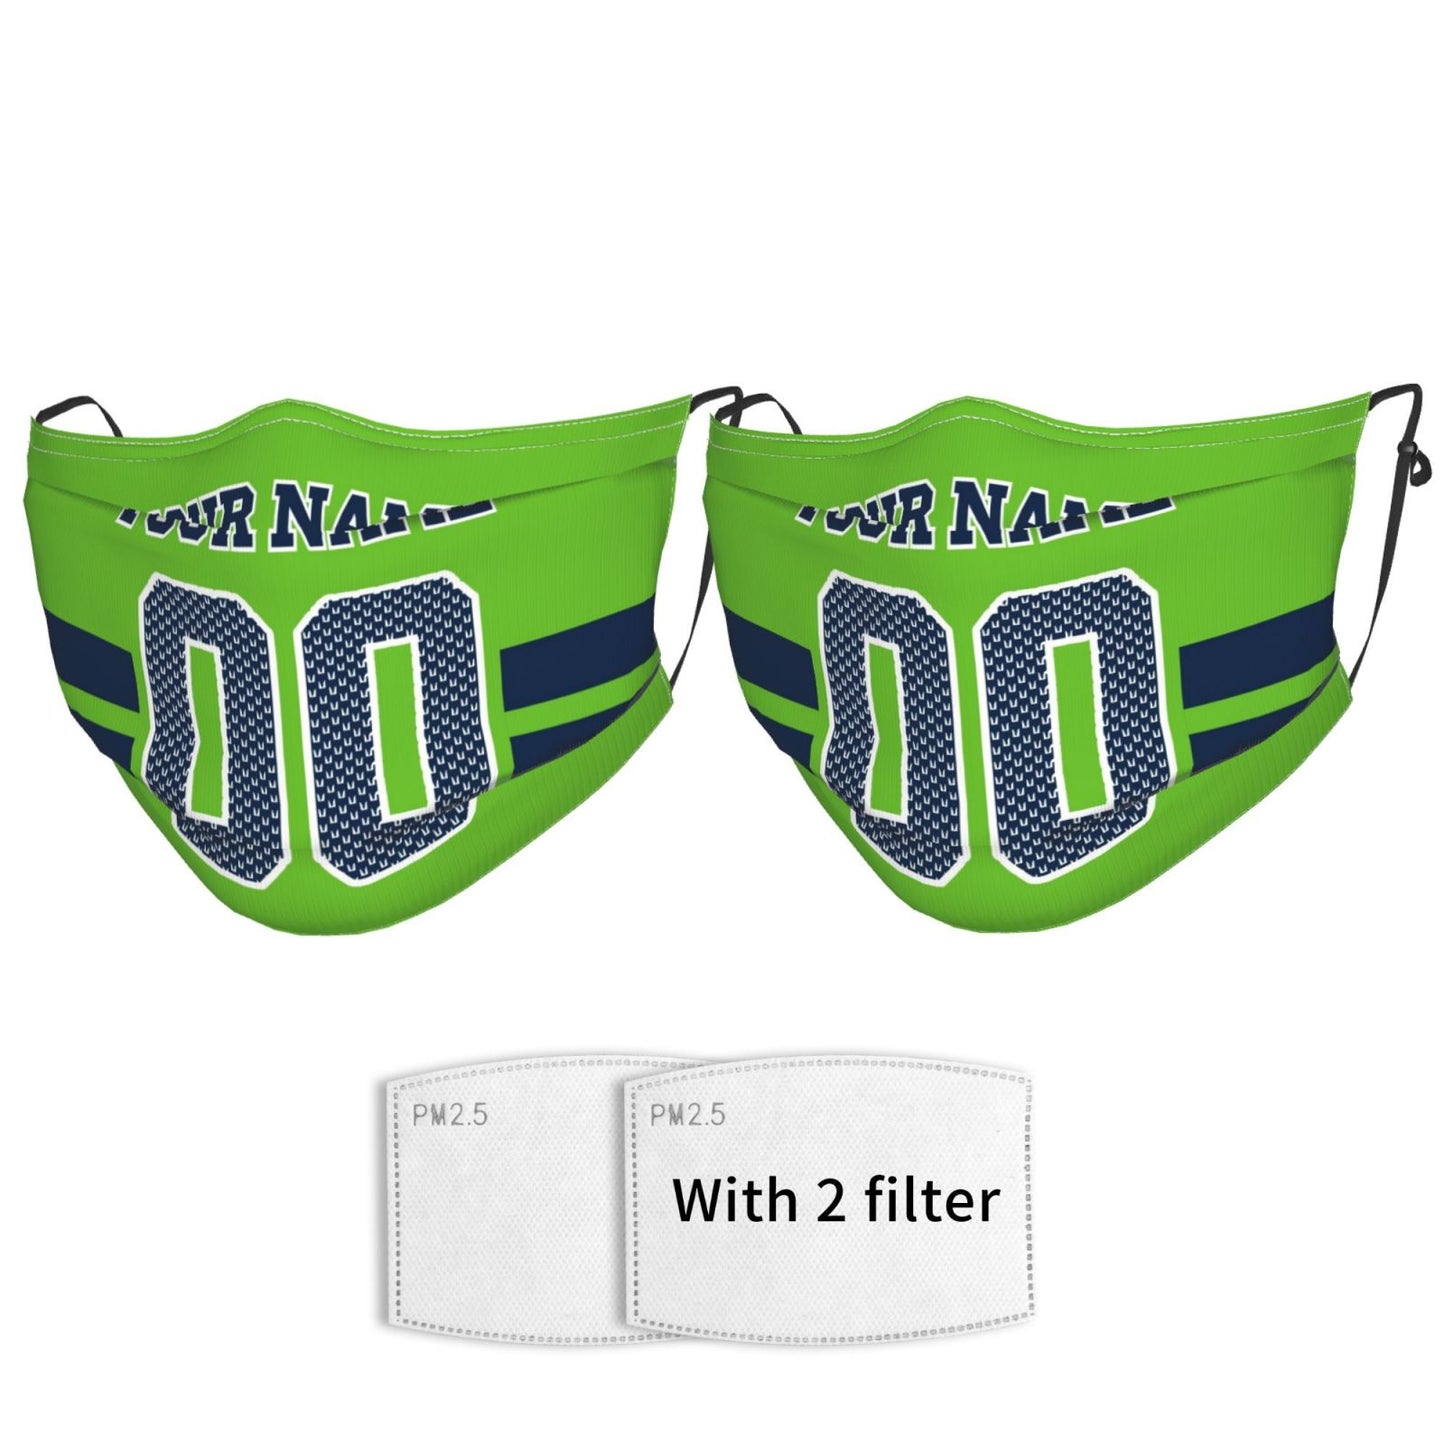 2-Pack Seattle Seahawks Face Covering Football Team Decorative Adult Face Mask With Filters PM 2.5 Green